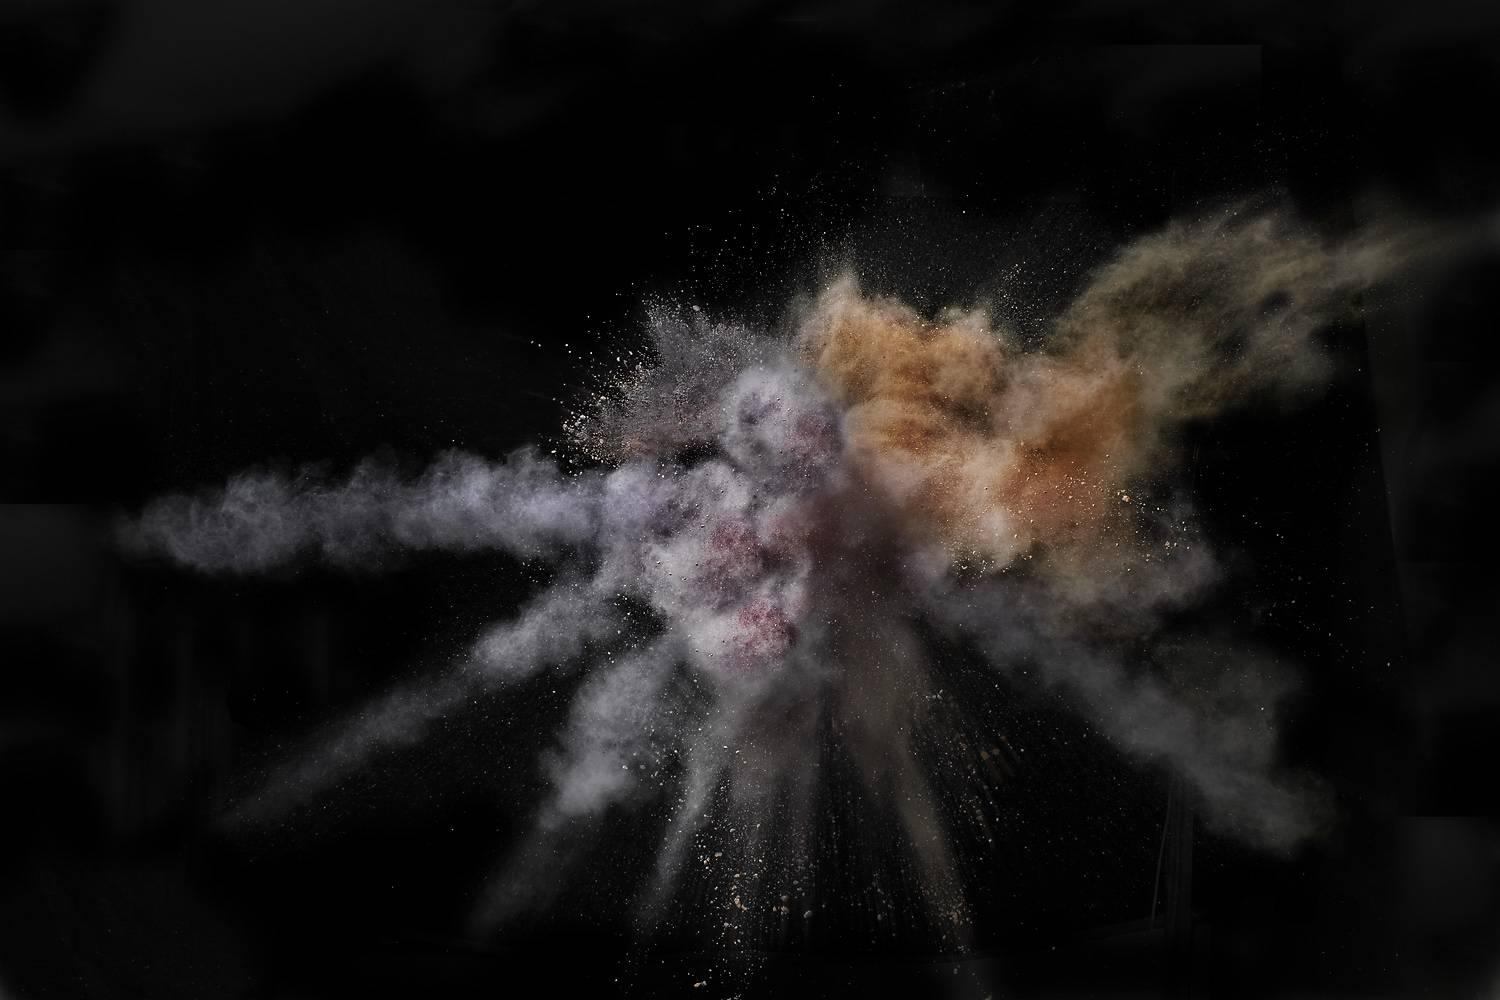 Christian Stoll Abstract Print - Burst III - limited edition photograph in archival artwork portfolio gift binder